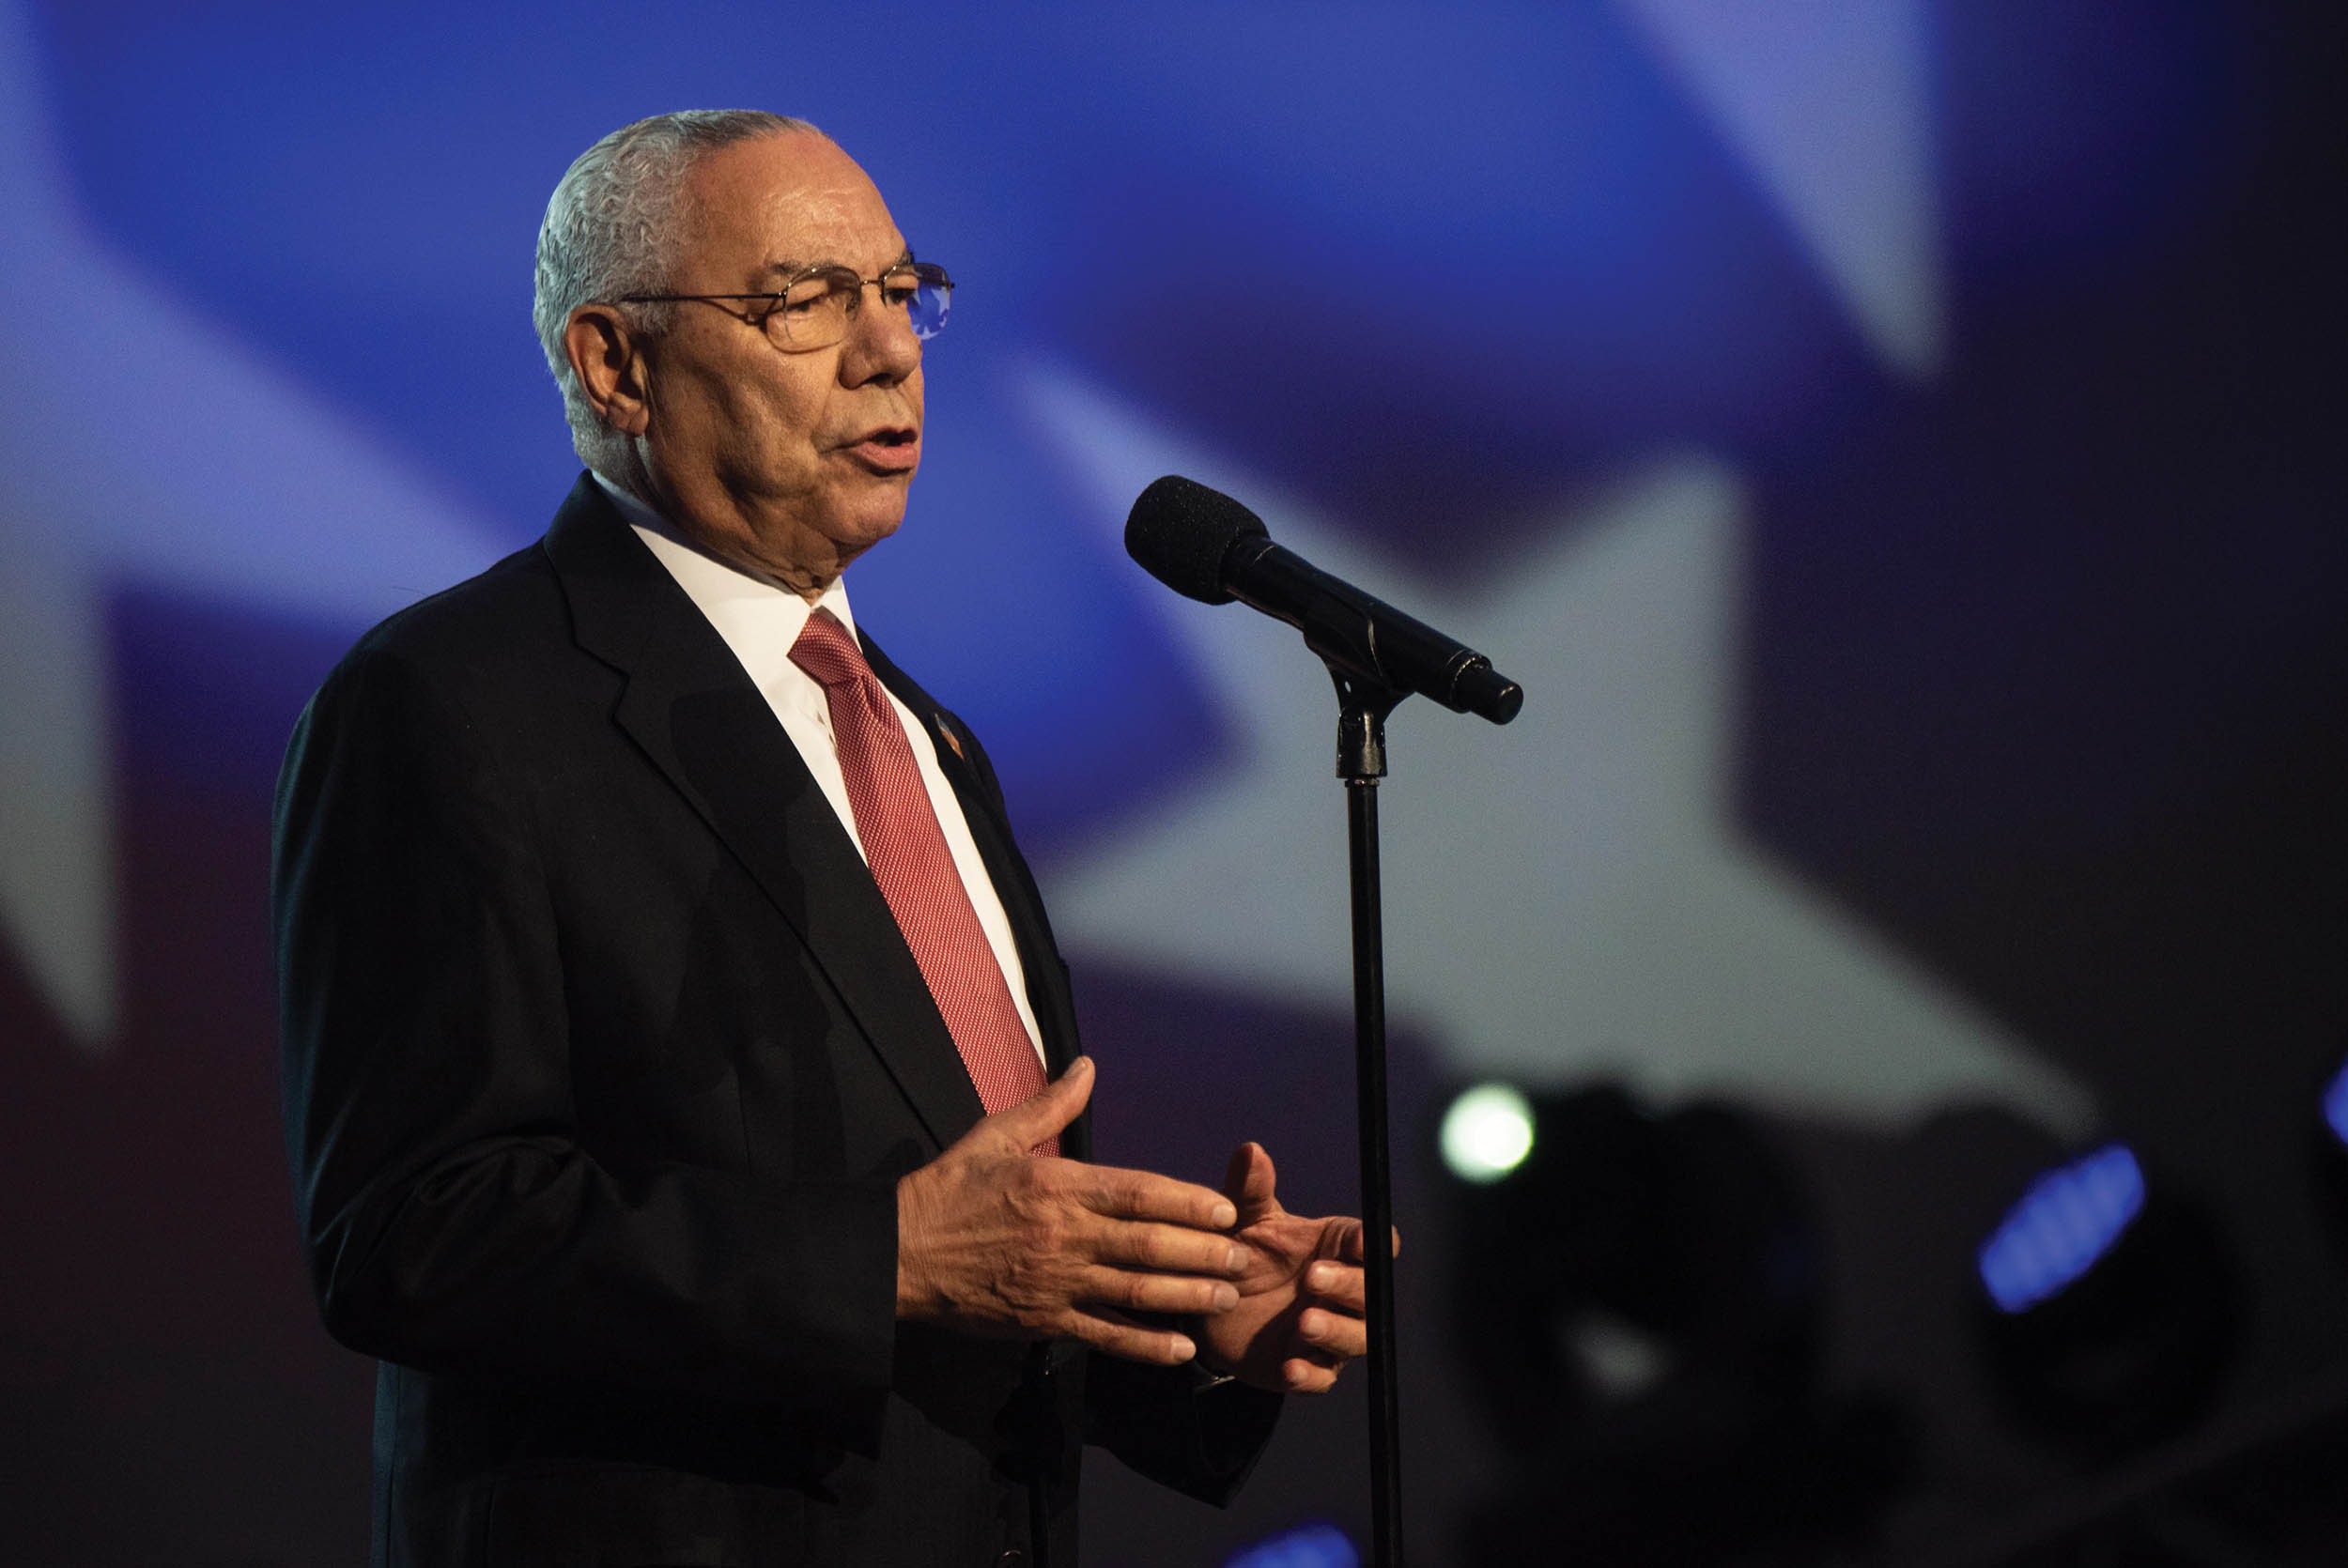 General Colin Powell, former Secretary of State and 12th Chairman of the Joint Chiefs of Staff, speaks during National Memorial Day Concert on West Lawn of Capitol, Washington, DC, May 27, 2018 (DOD/James K. McCann)